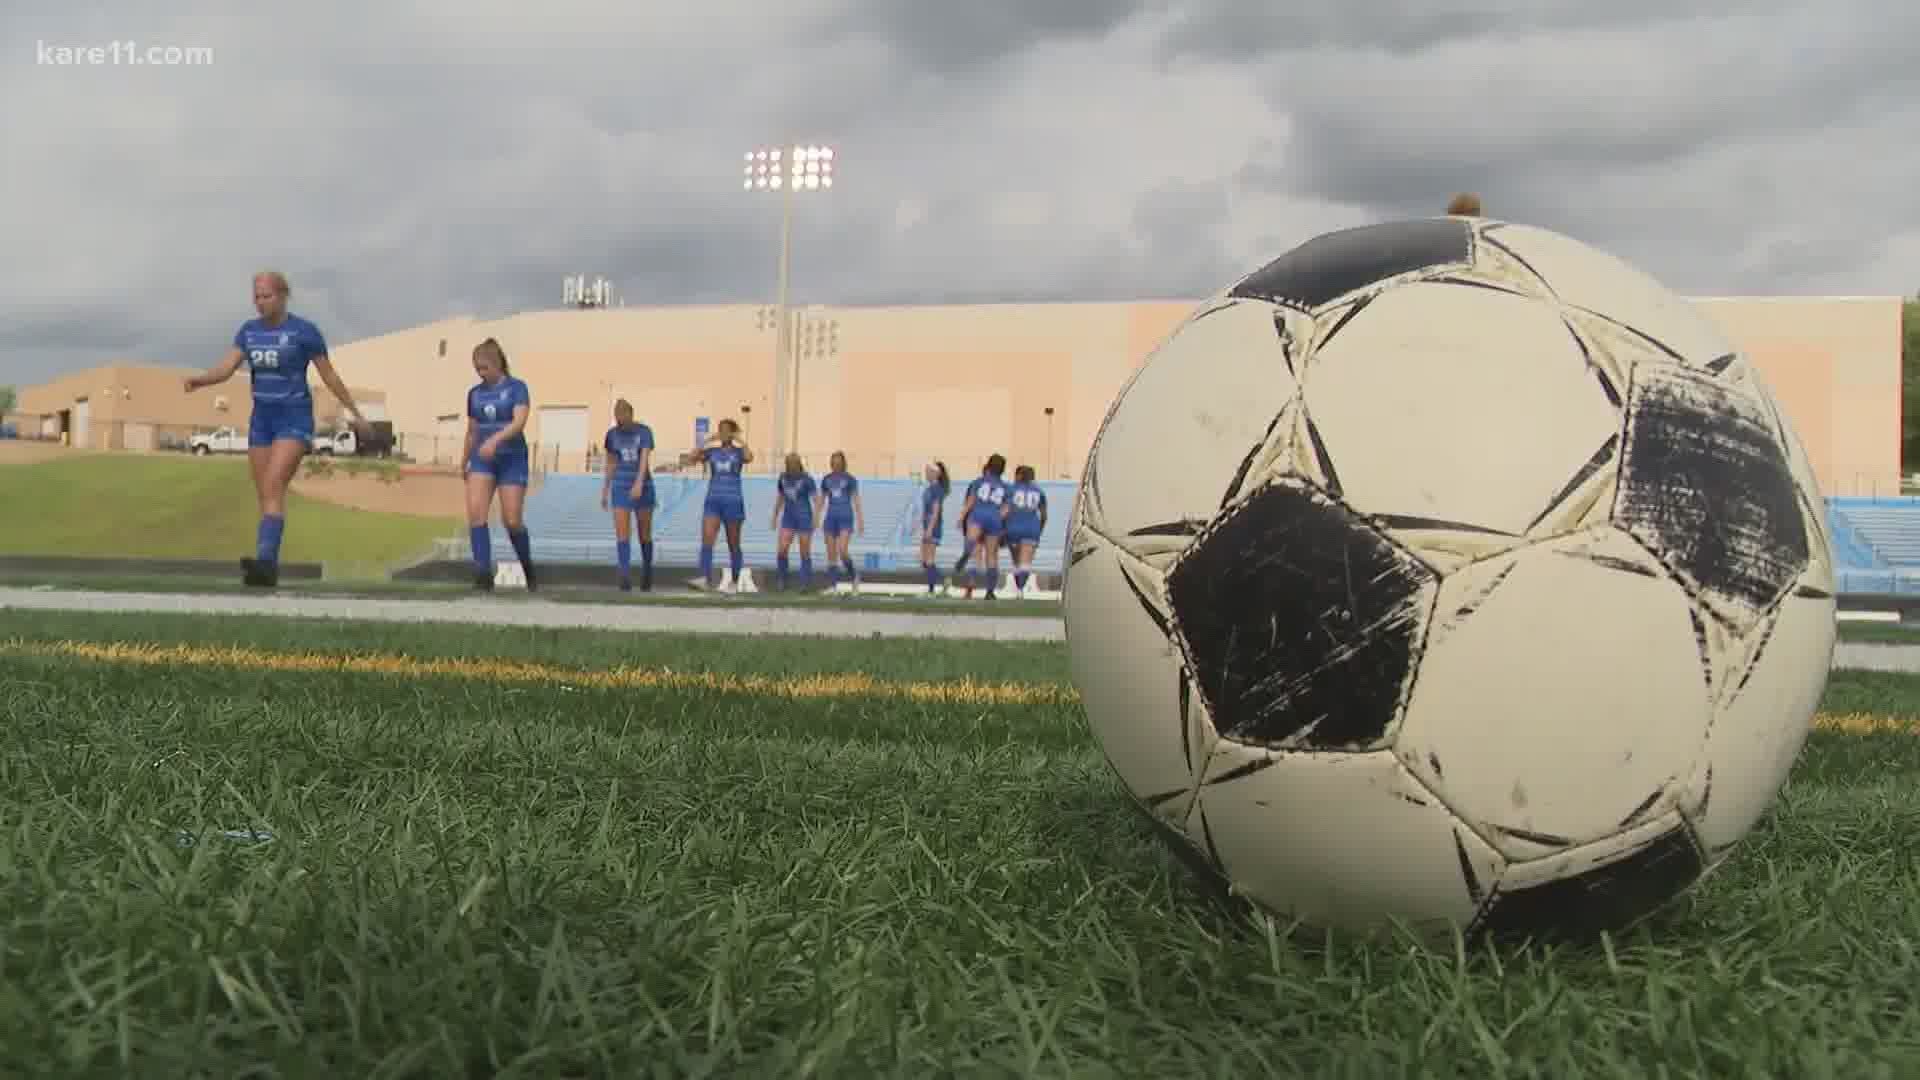 Weighing the risks versus benefits of youth sports with Mayo Clinic.